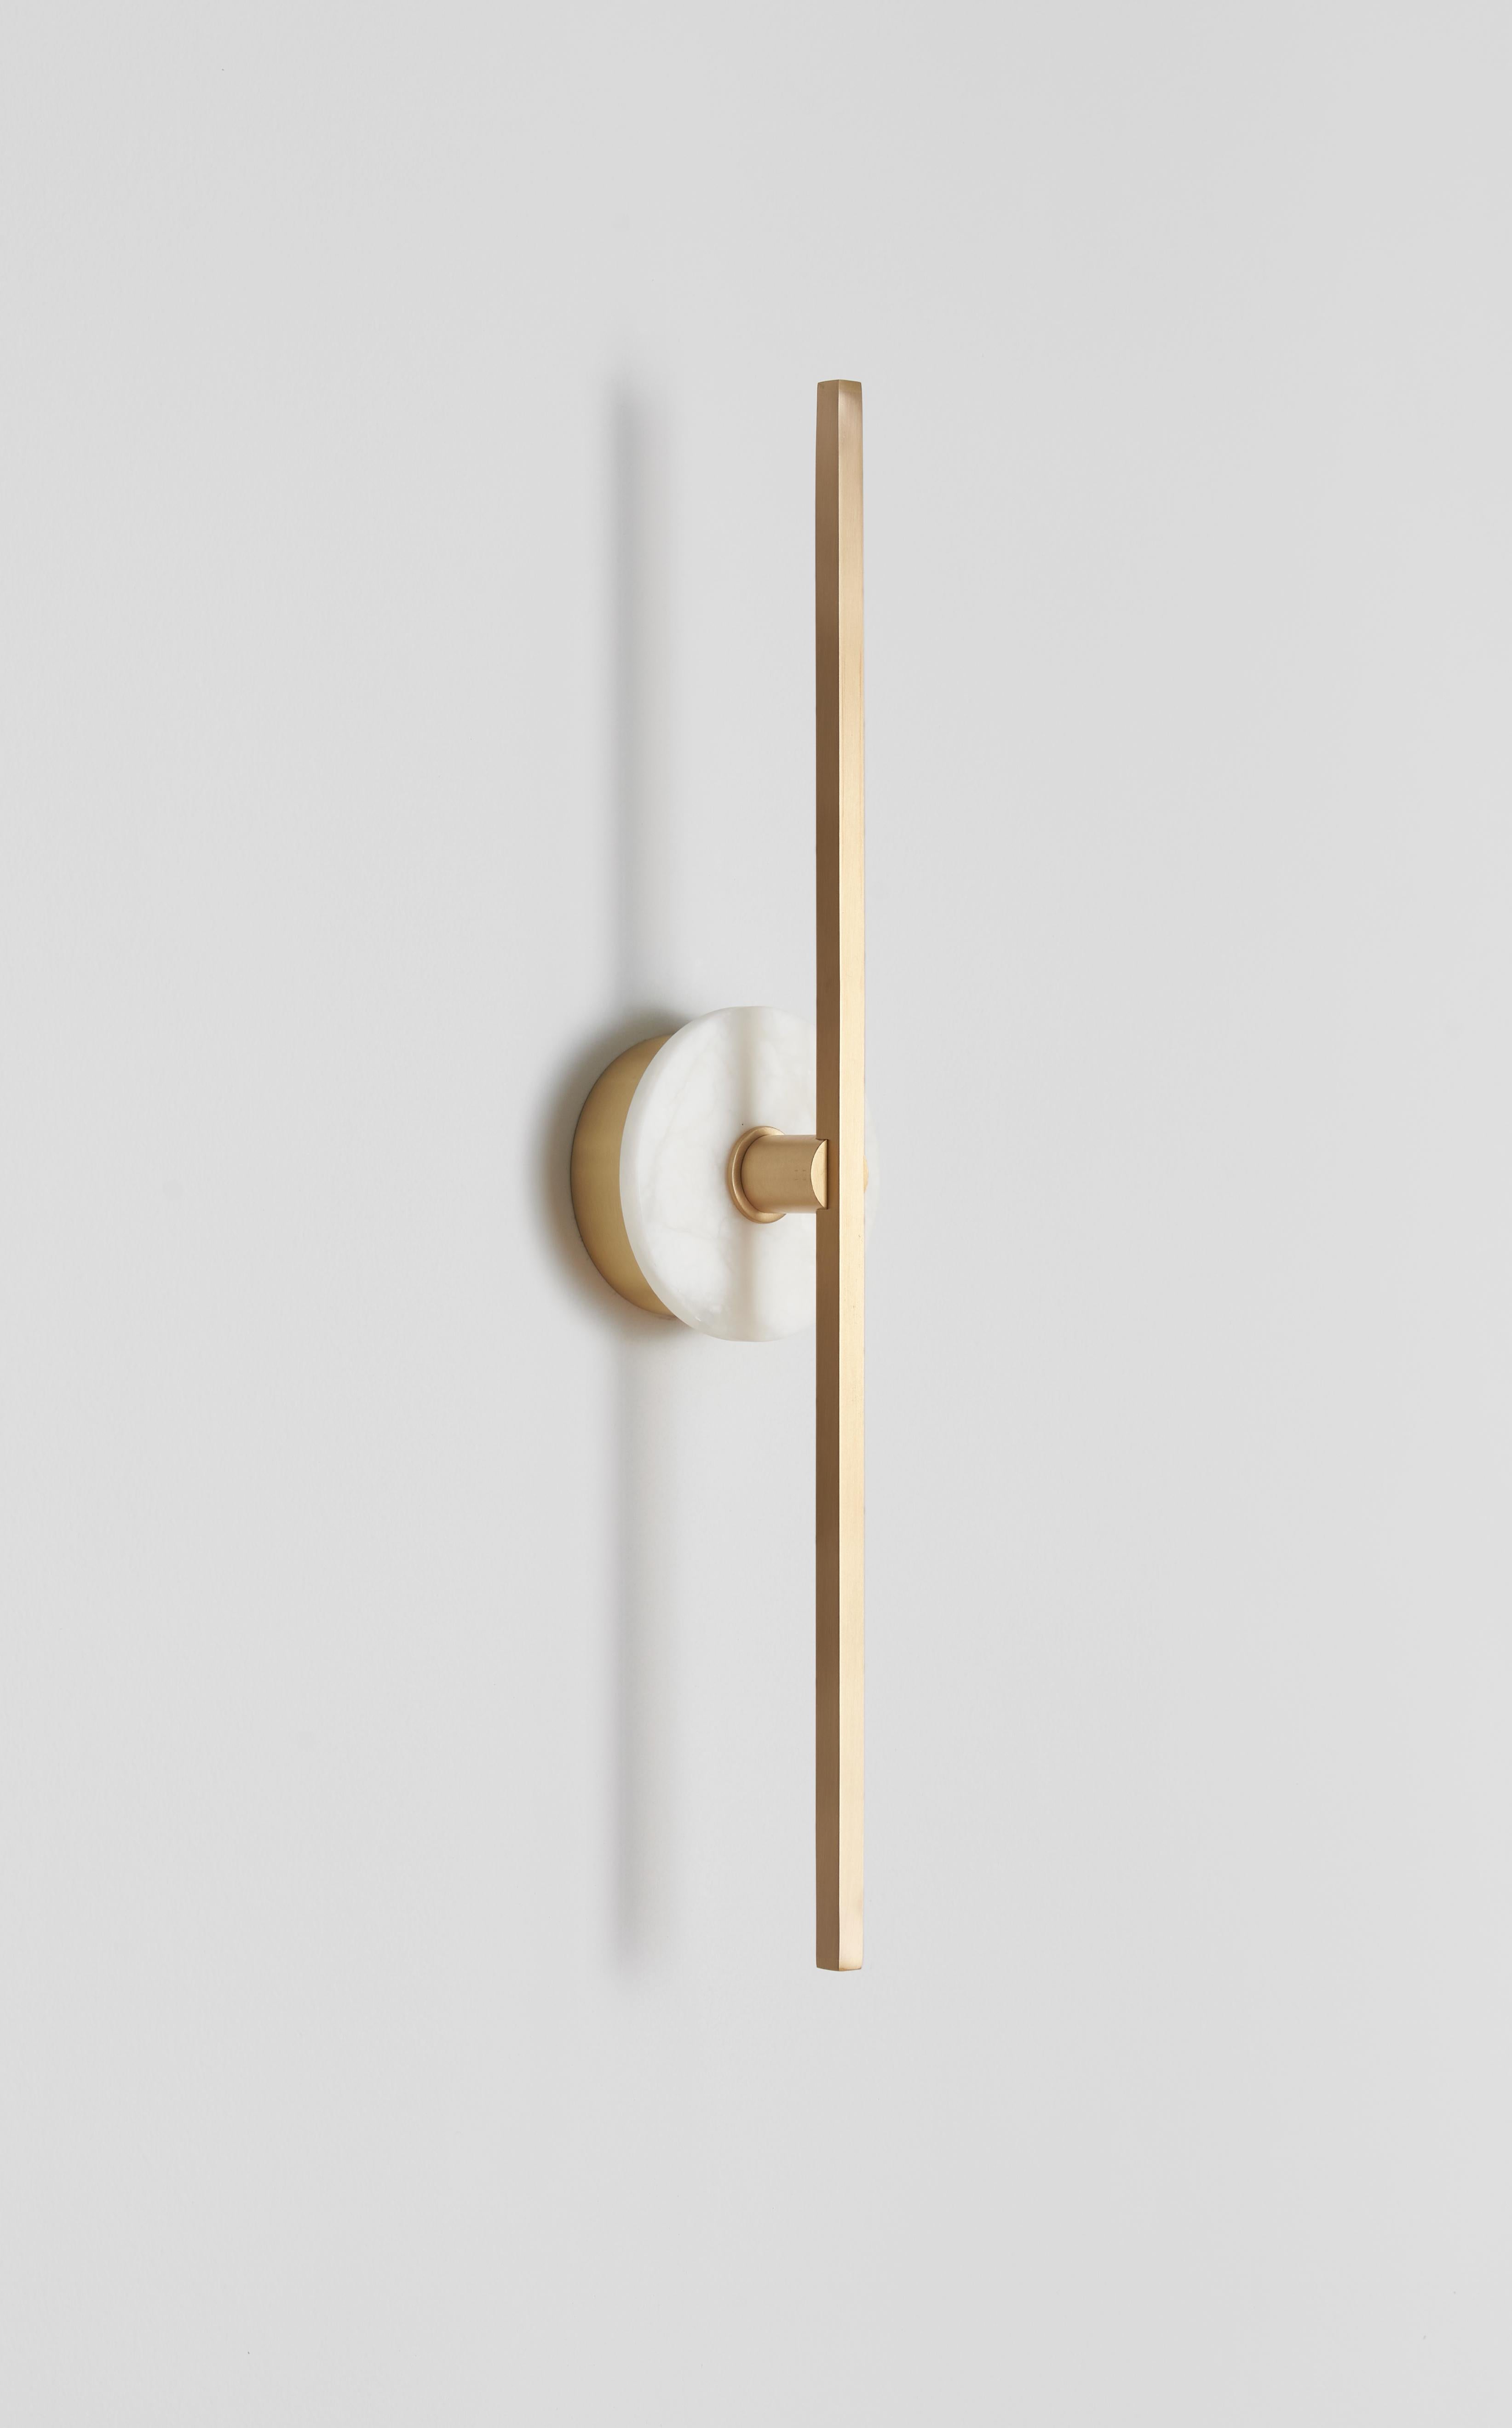 The Stick wall sconce combines the minimalism of thin brass profiles with the functionality and power of led technology.
The use of thin brass profiles creates a minimalist look that is both elegant and functional, while the incorporation of LED